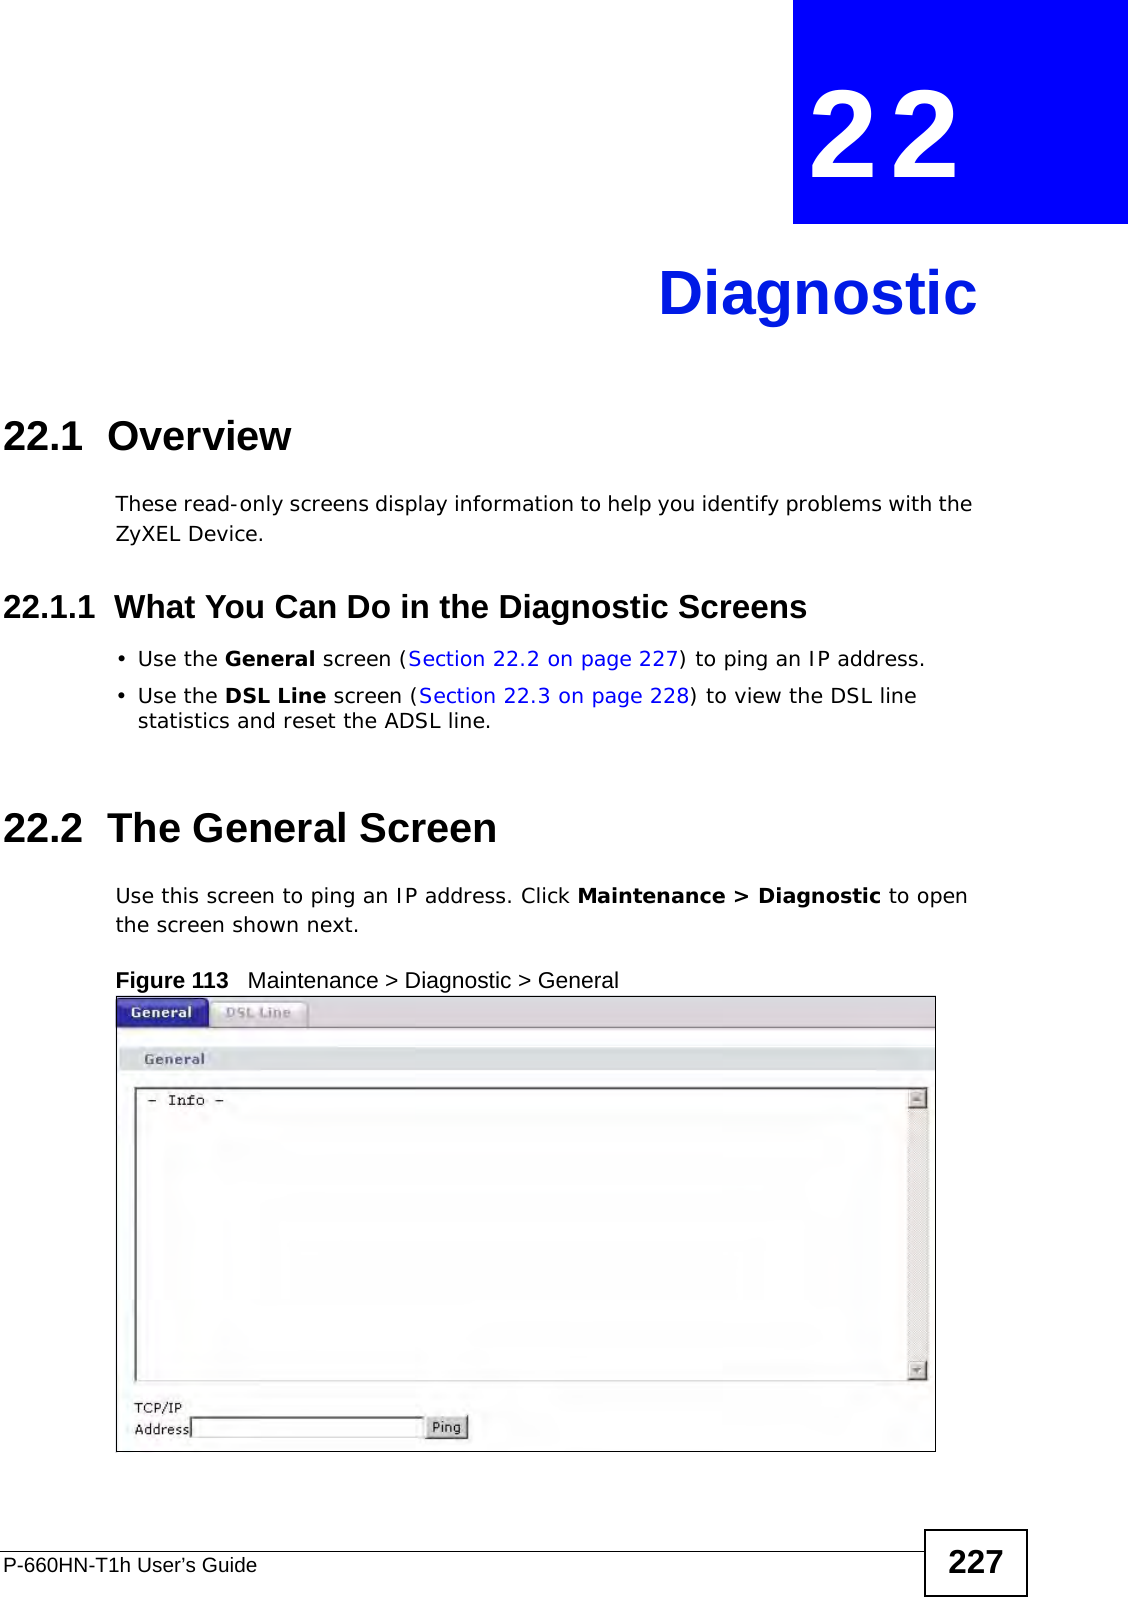 P-660HN-T1h User’s Guide 227CHAPTER  22 Diagnostic22.1  OverviewThese read-only screens display information to help you identify problems with the ZyXEL Device.22.1.1  What You Can Do in the Diagnostic Screens•Use the General screen (Section 22.2 on page 227) to ping an IP address.•Use the DSL Line screen (Section 22.3 on page 228) to view the DSL line statistics and reset the ADSL line.22.2  The General Screen Use this screen to ping an IP address. Click Maintenance &gt; Diagnostic to open the screen shown next.Figure 113   Maintenance &gt; Diagnostic &gt; General